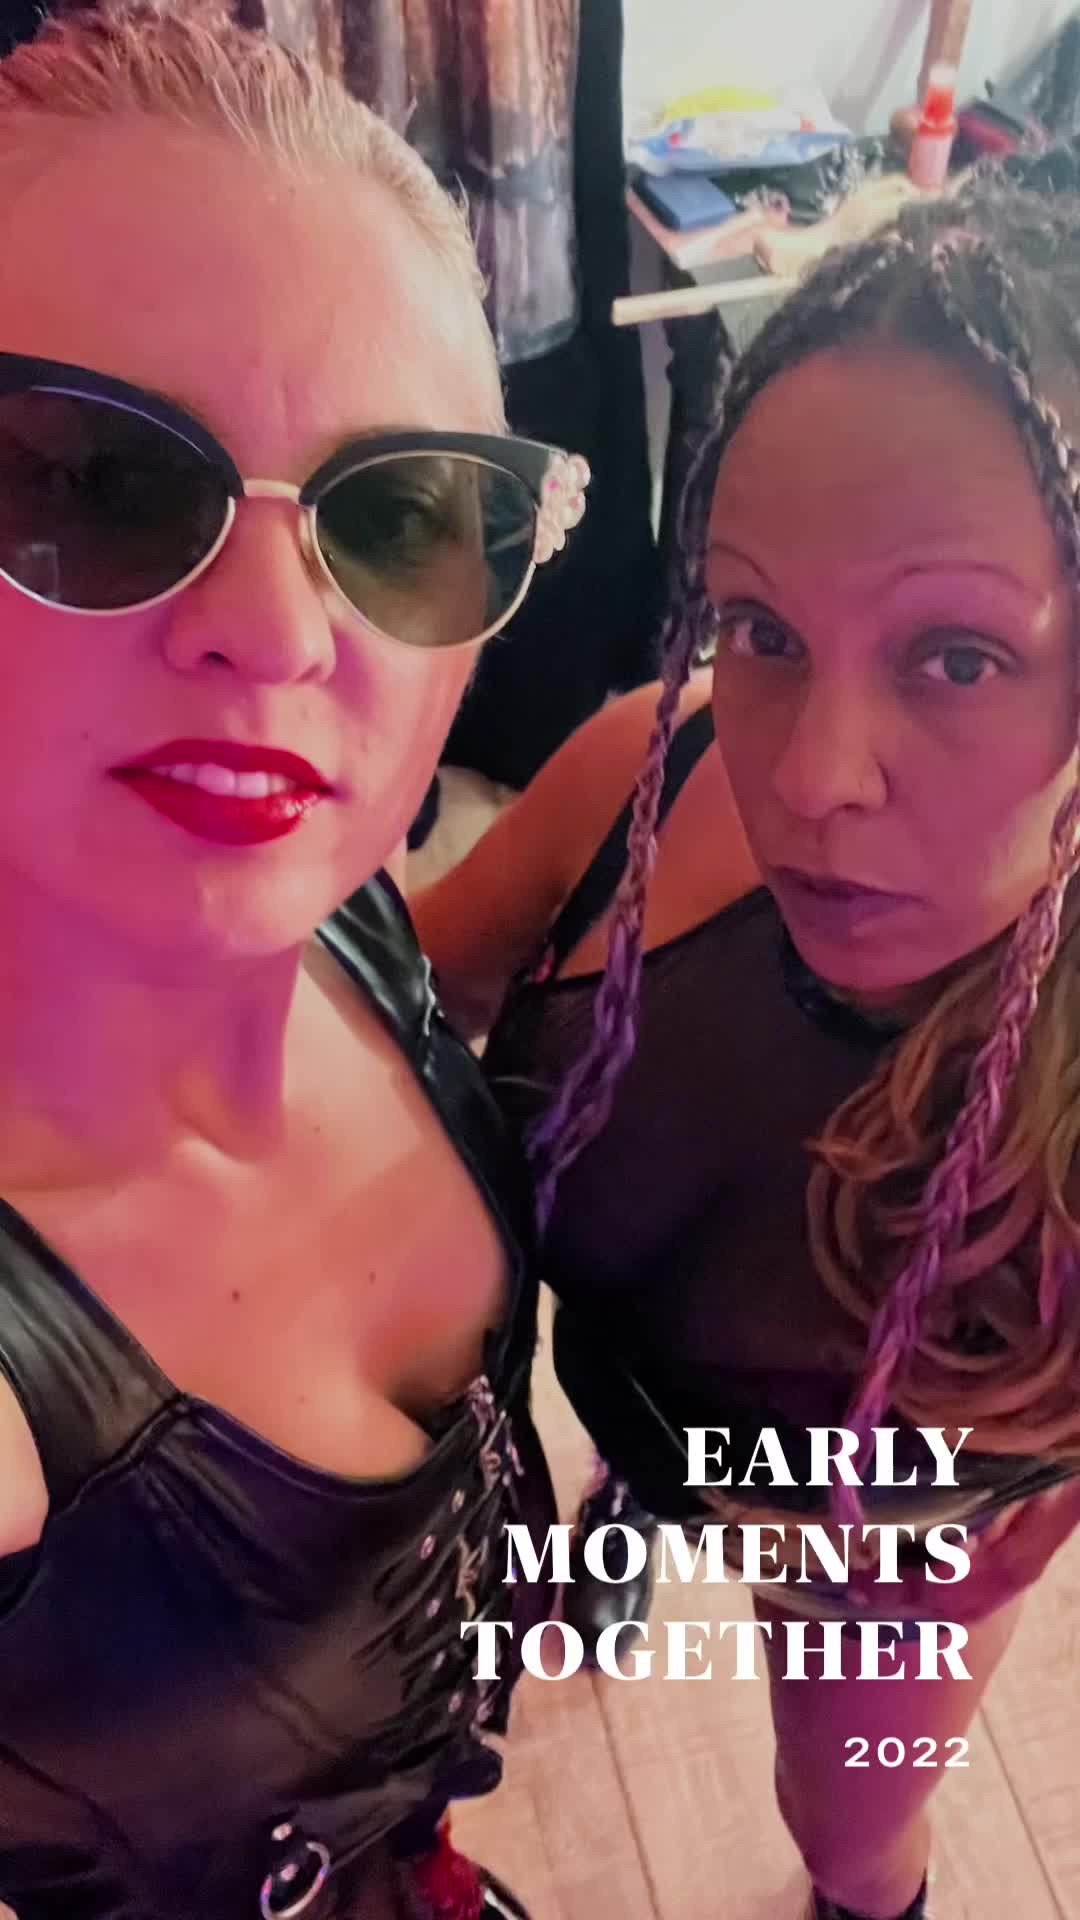 Video post by MistressMD